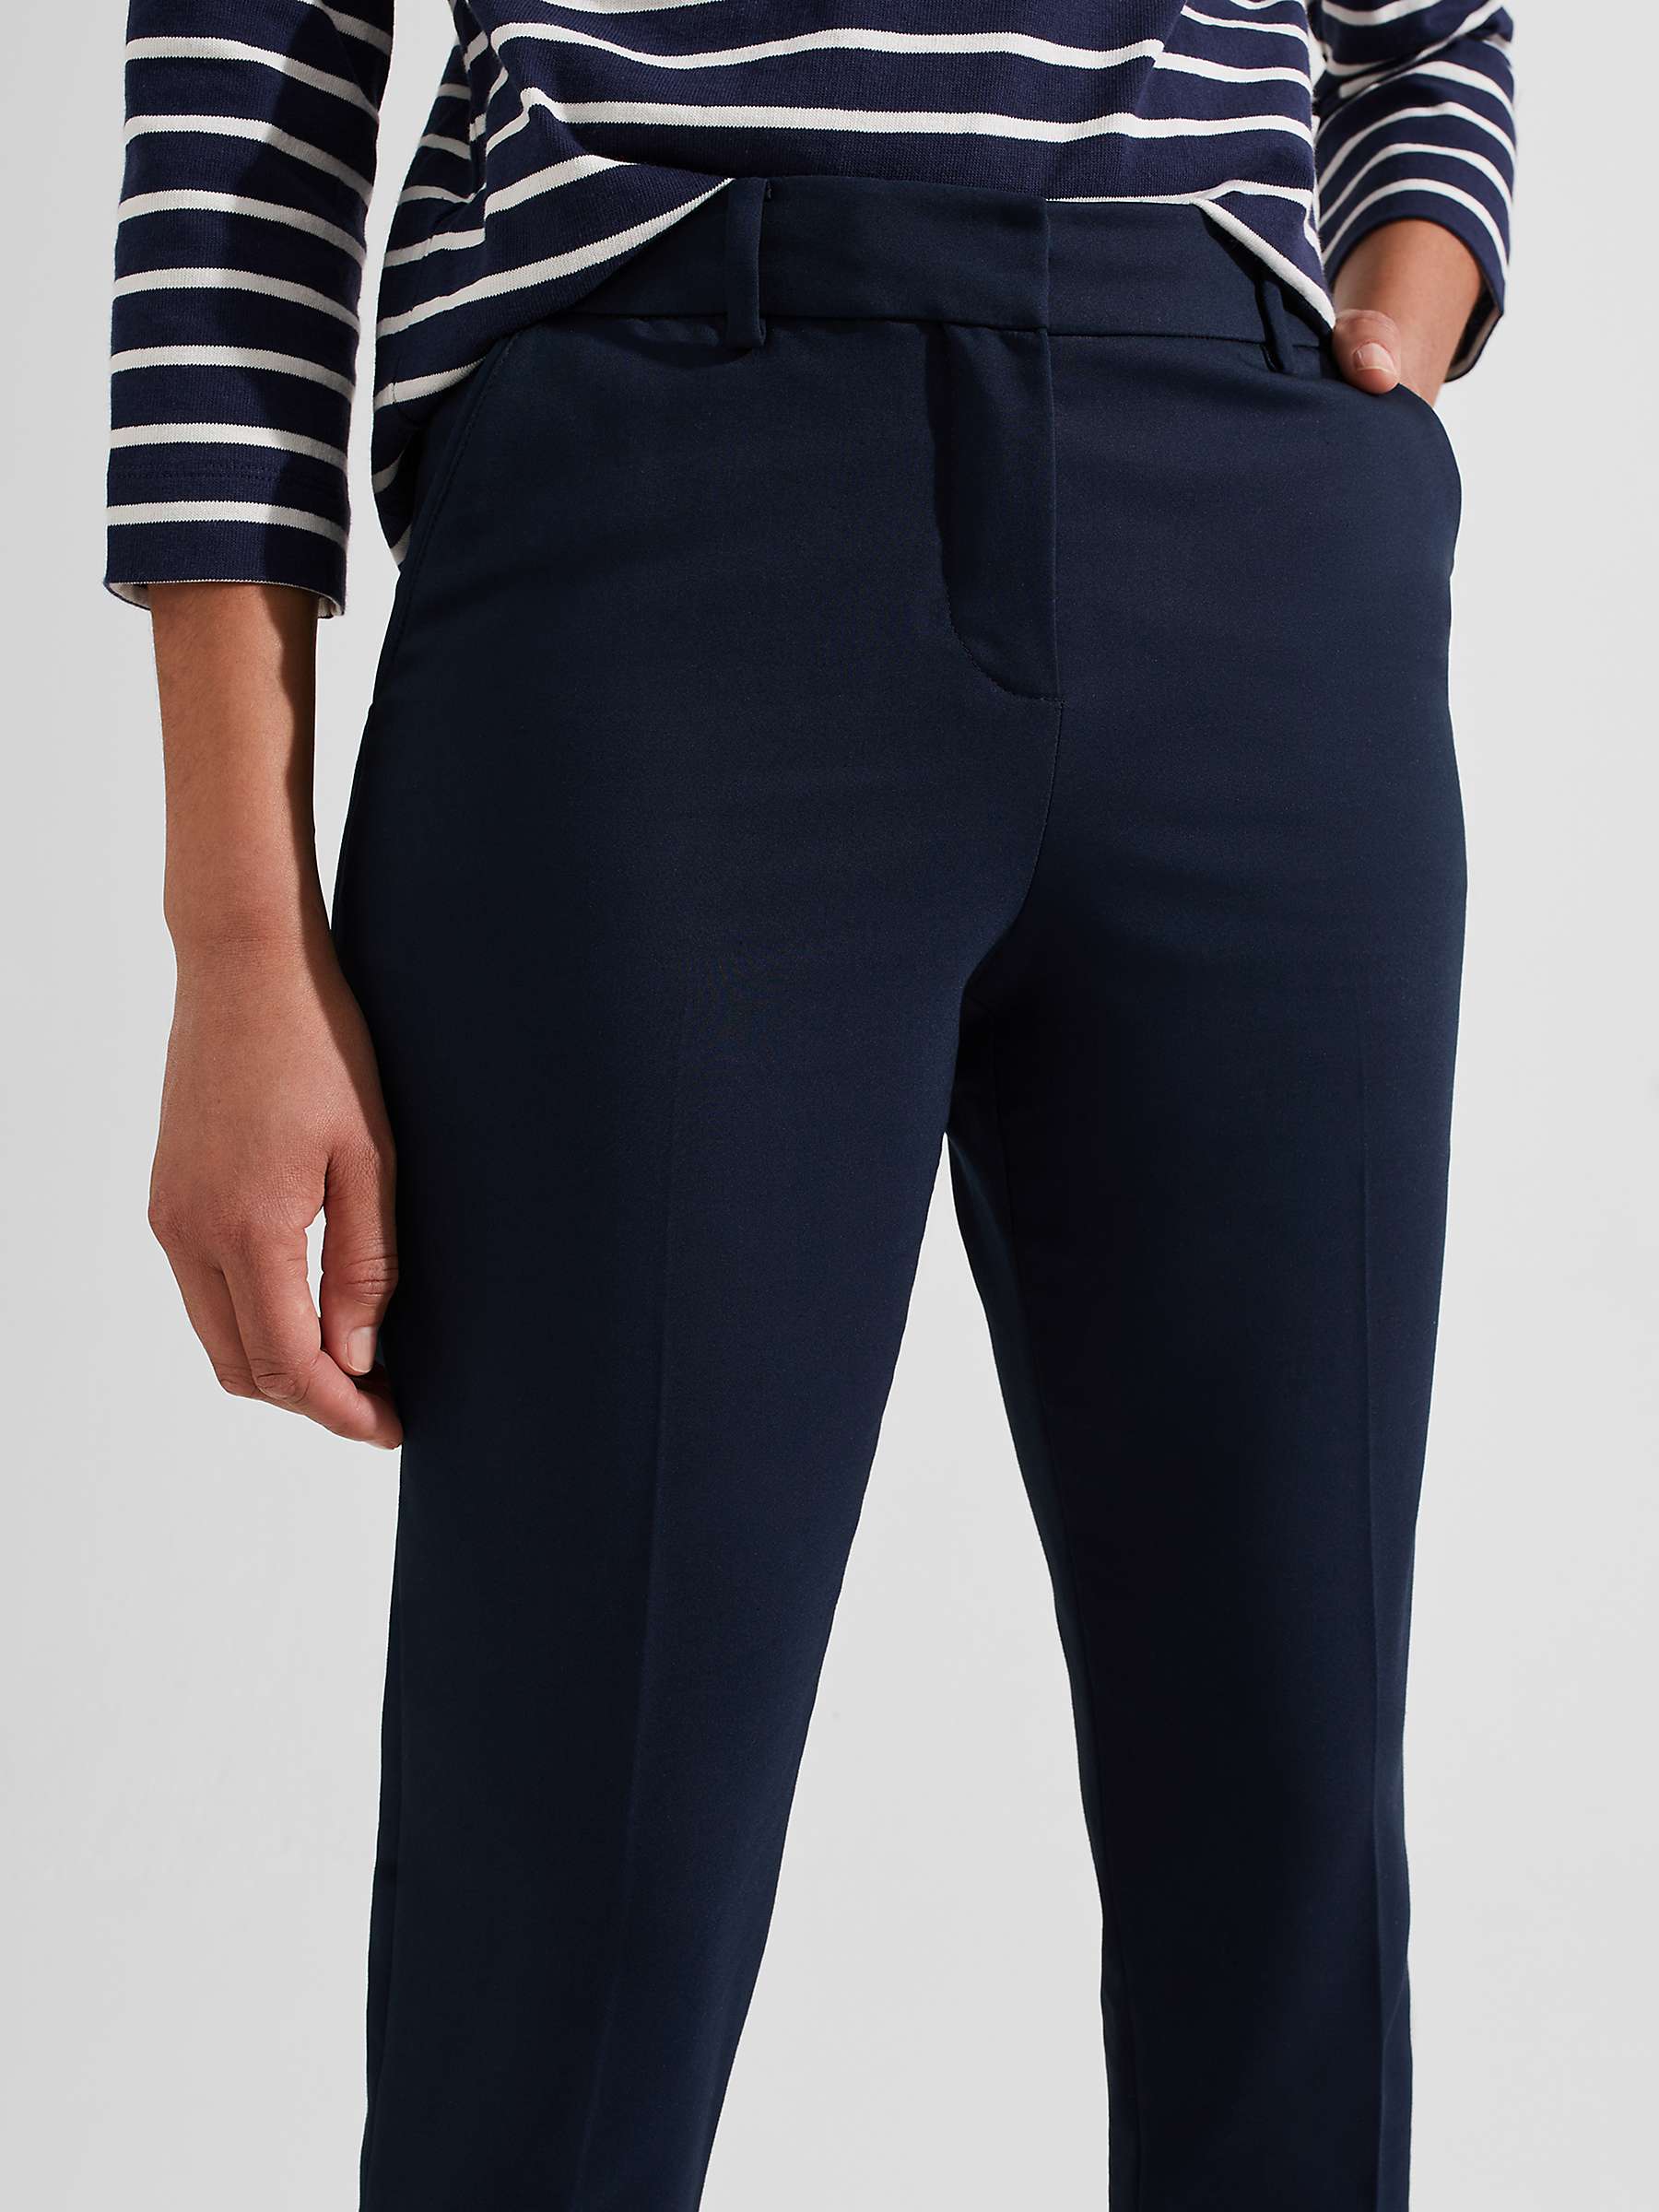 Buy Hobbs Quin Cotton Blend Trousers, Navy Online at johnlewis.com